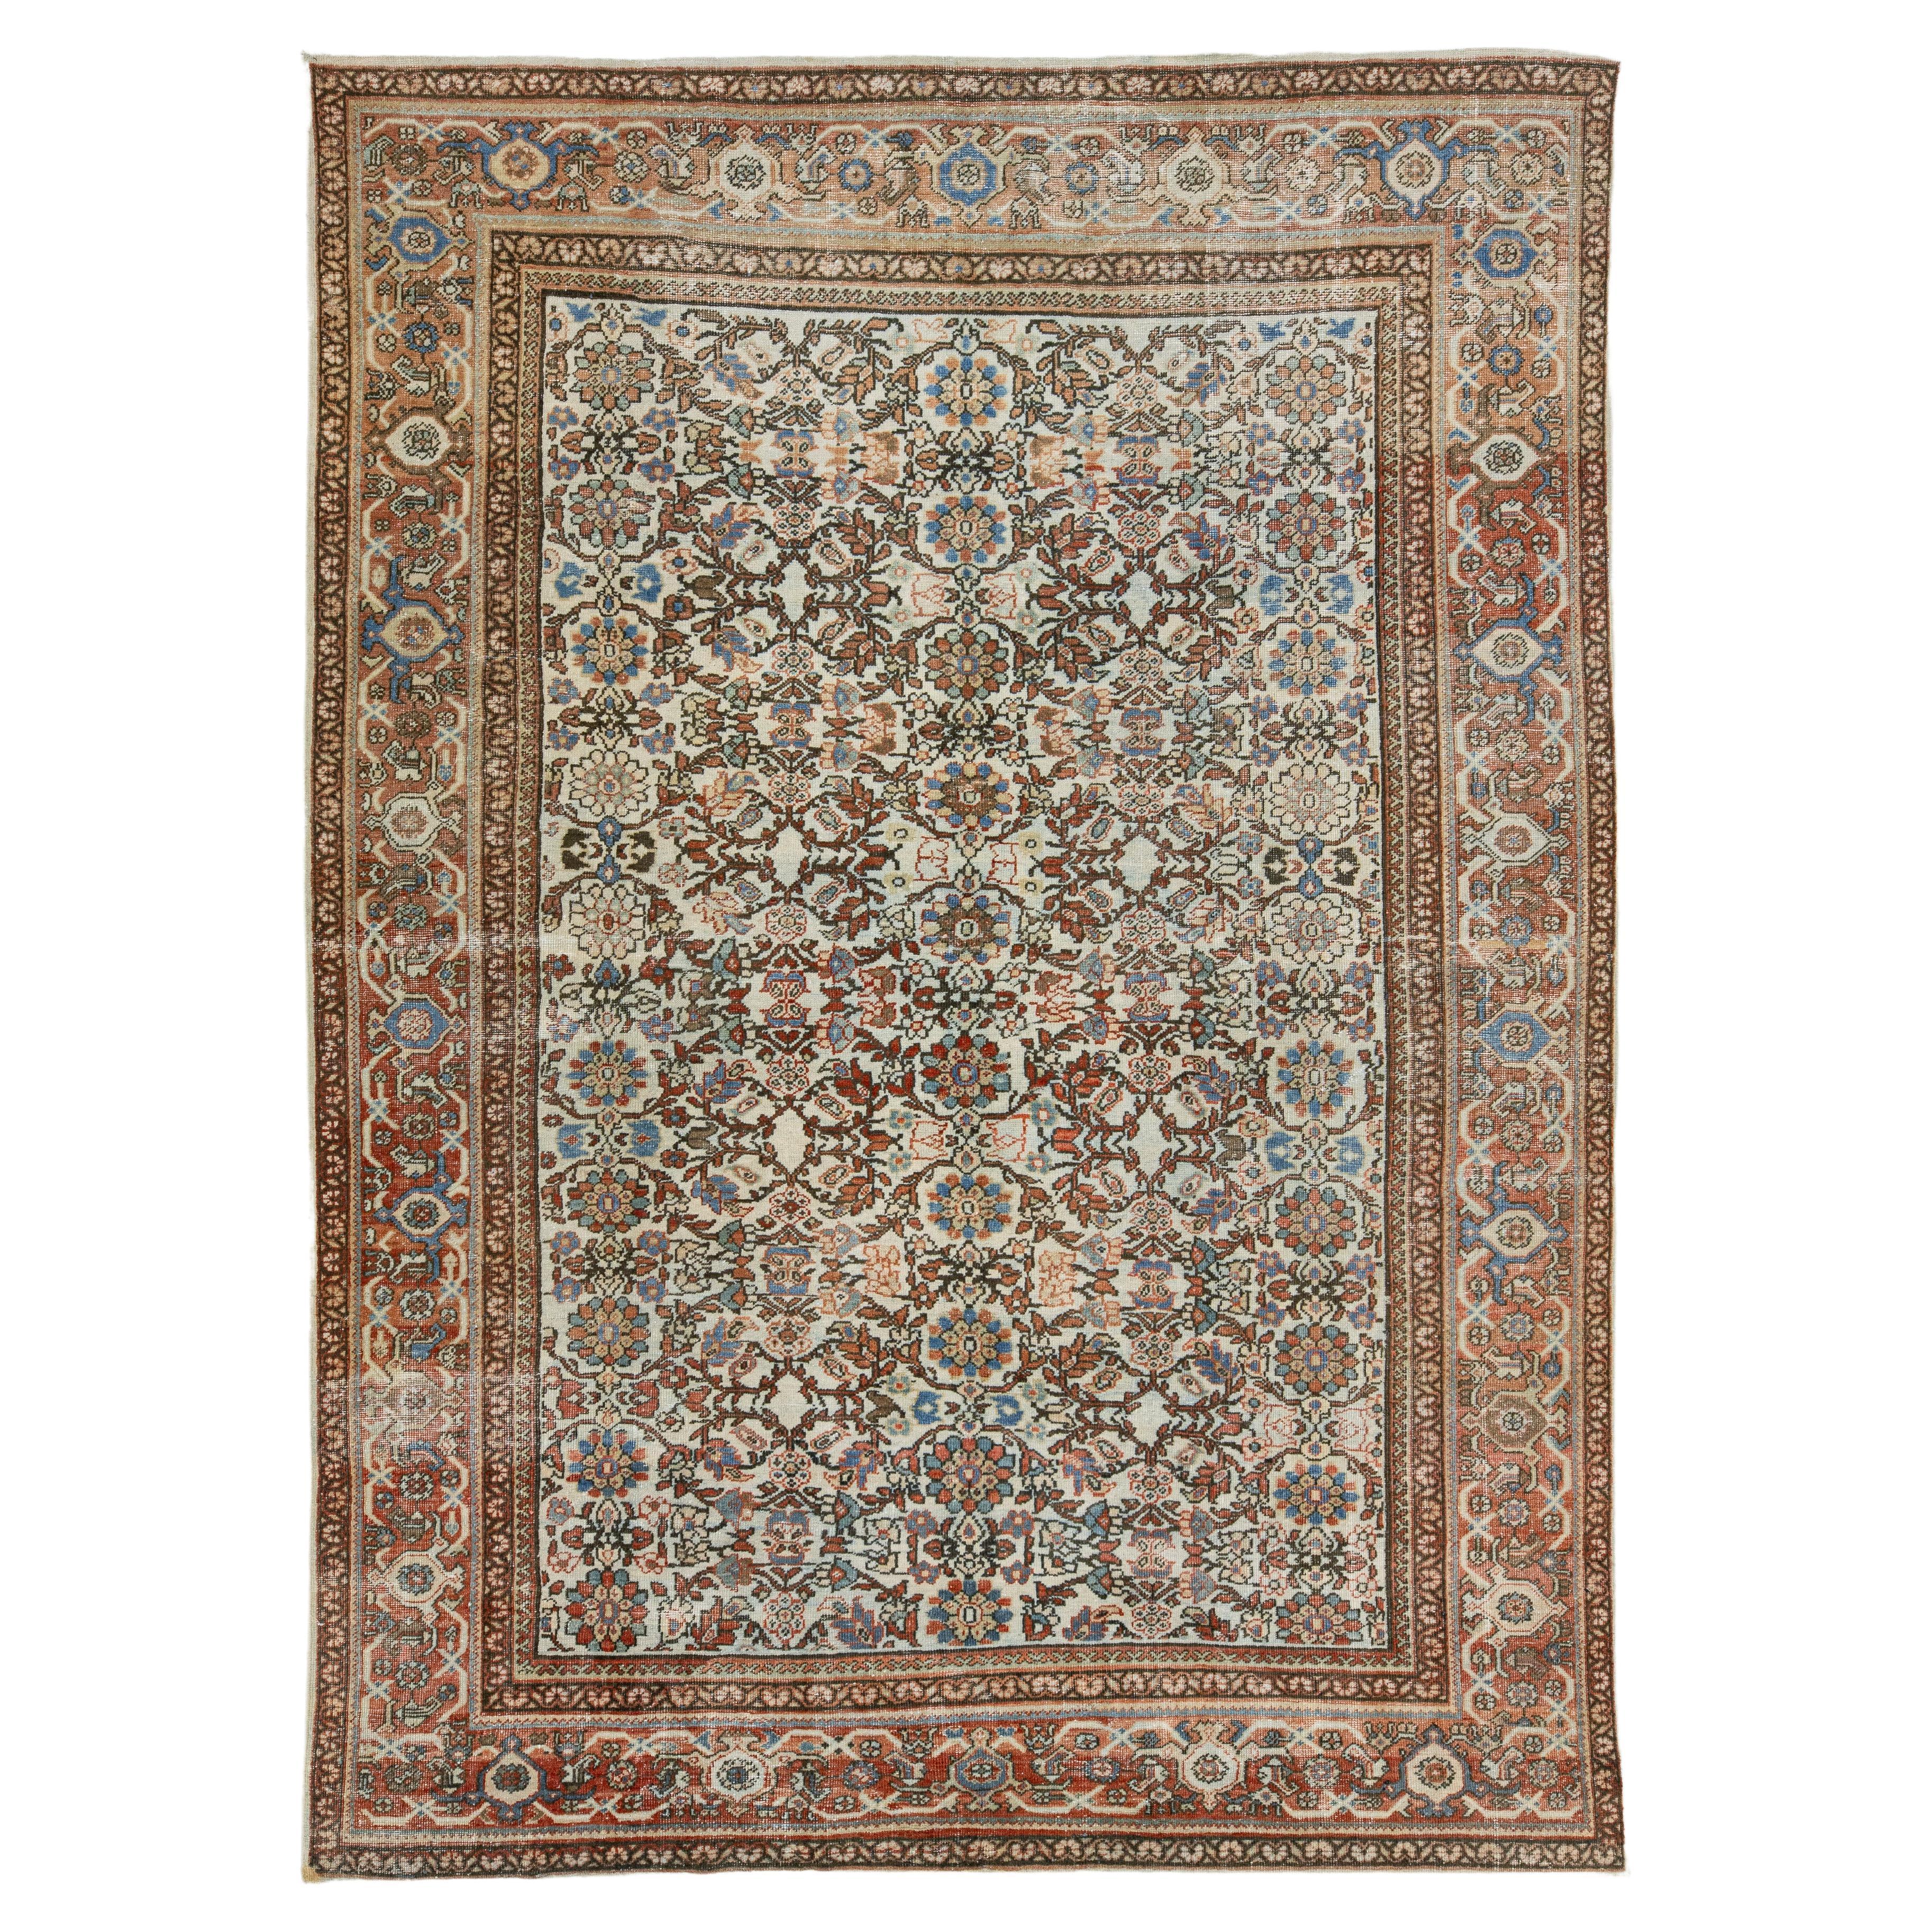 Handmade Multicolor Persian Mahal Designed Wool Rug From the 1910s